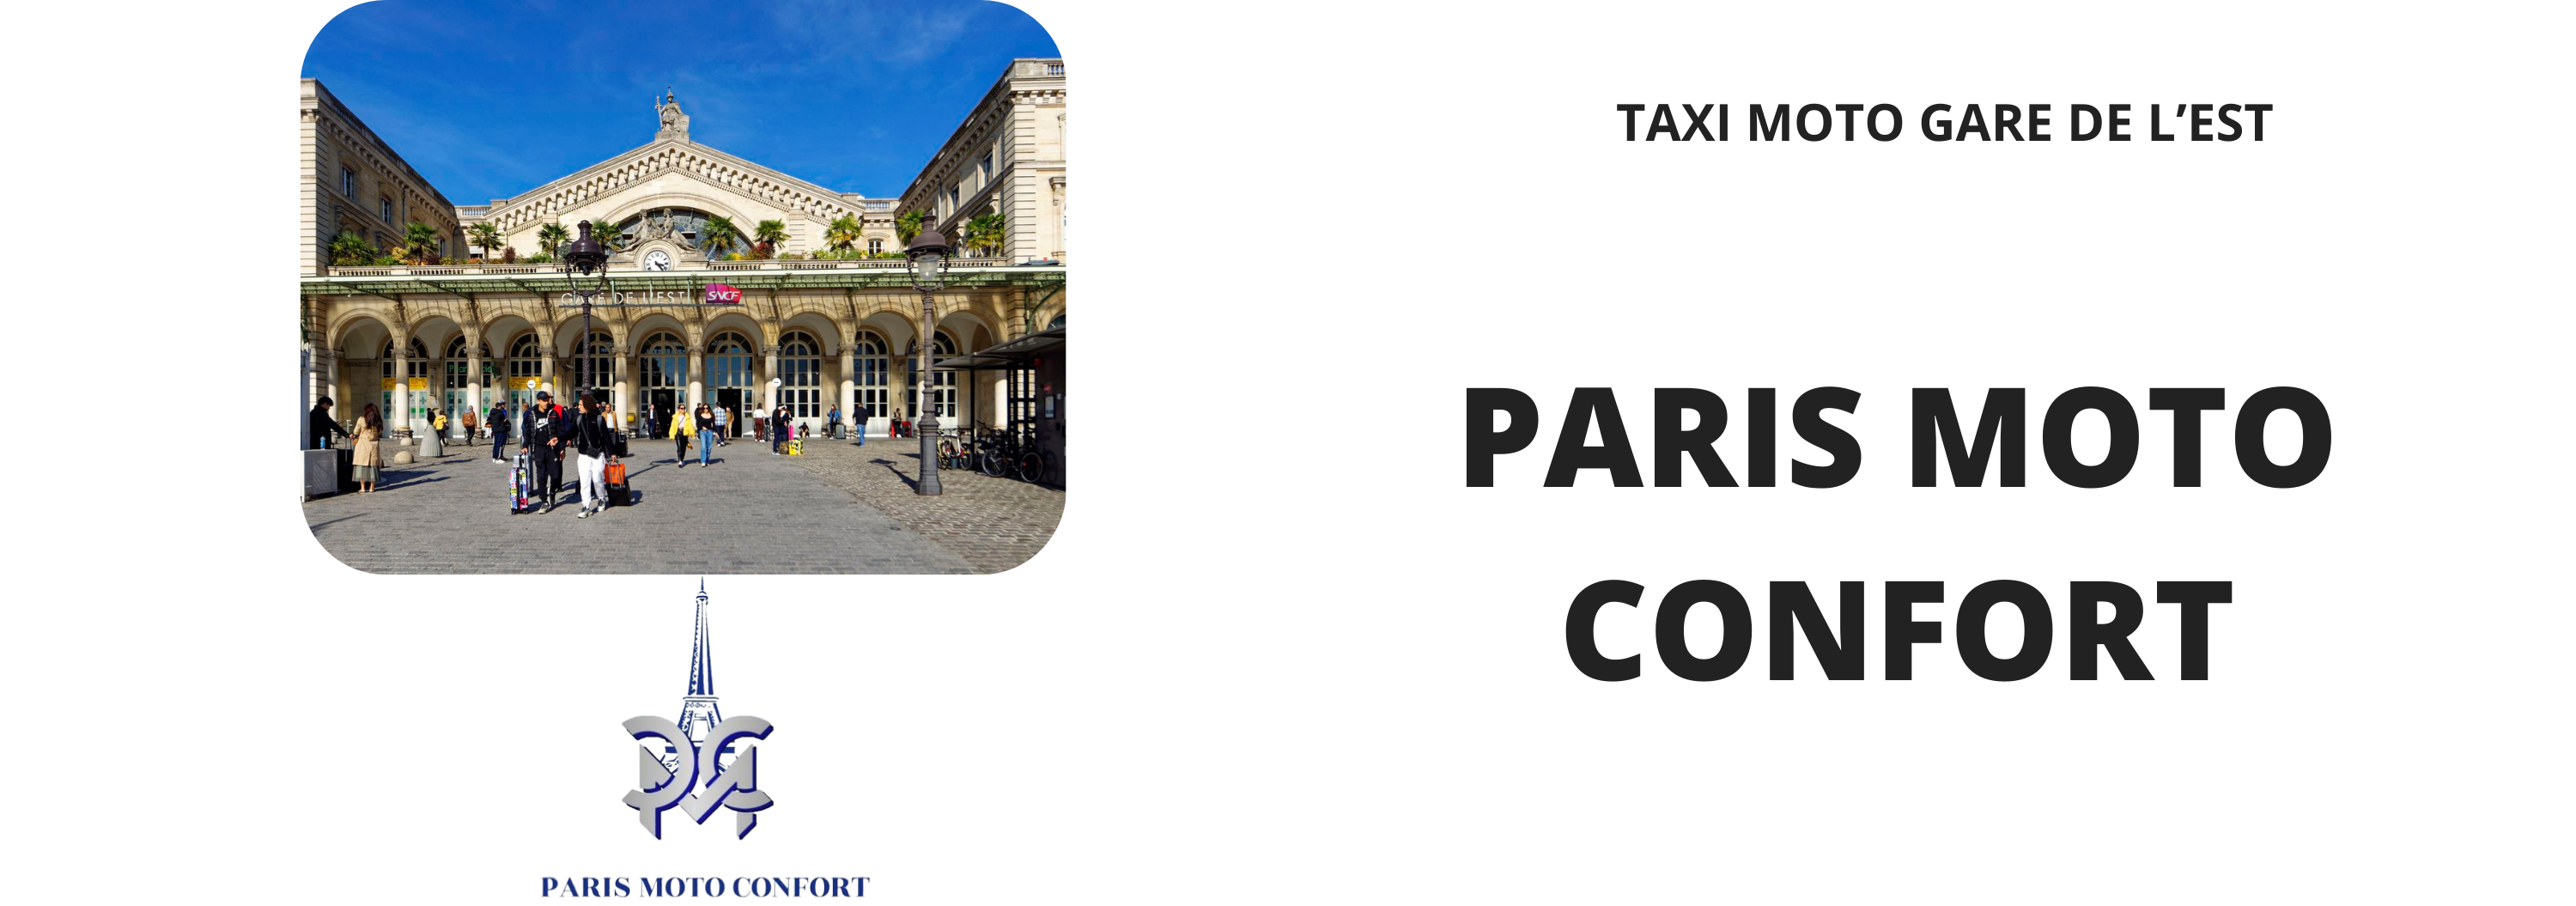 You are currently viewing Taxi moto gare de l’Est